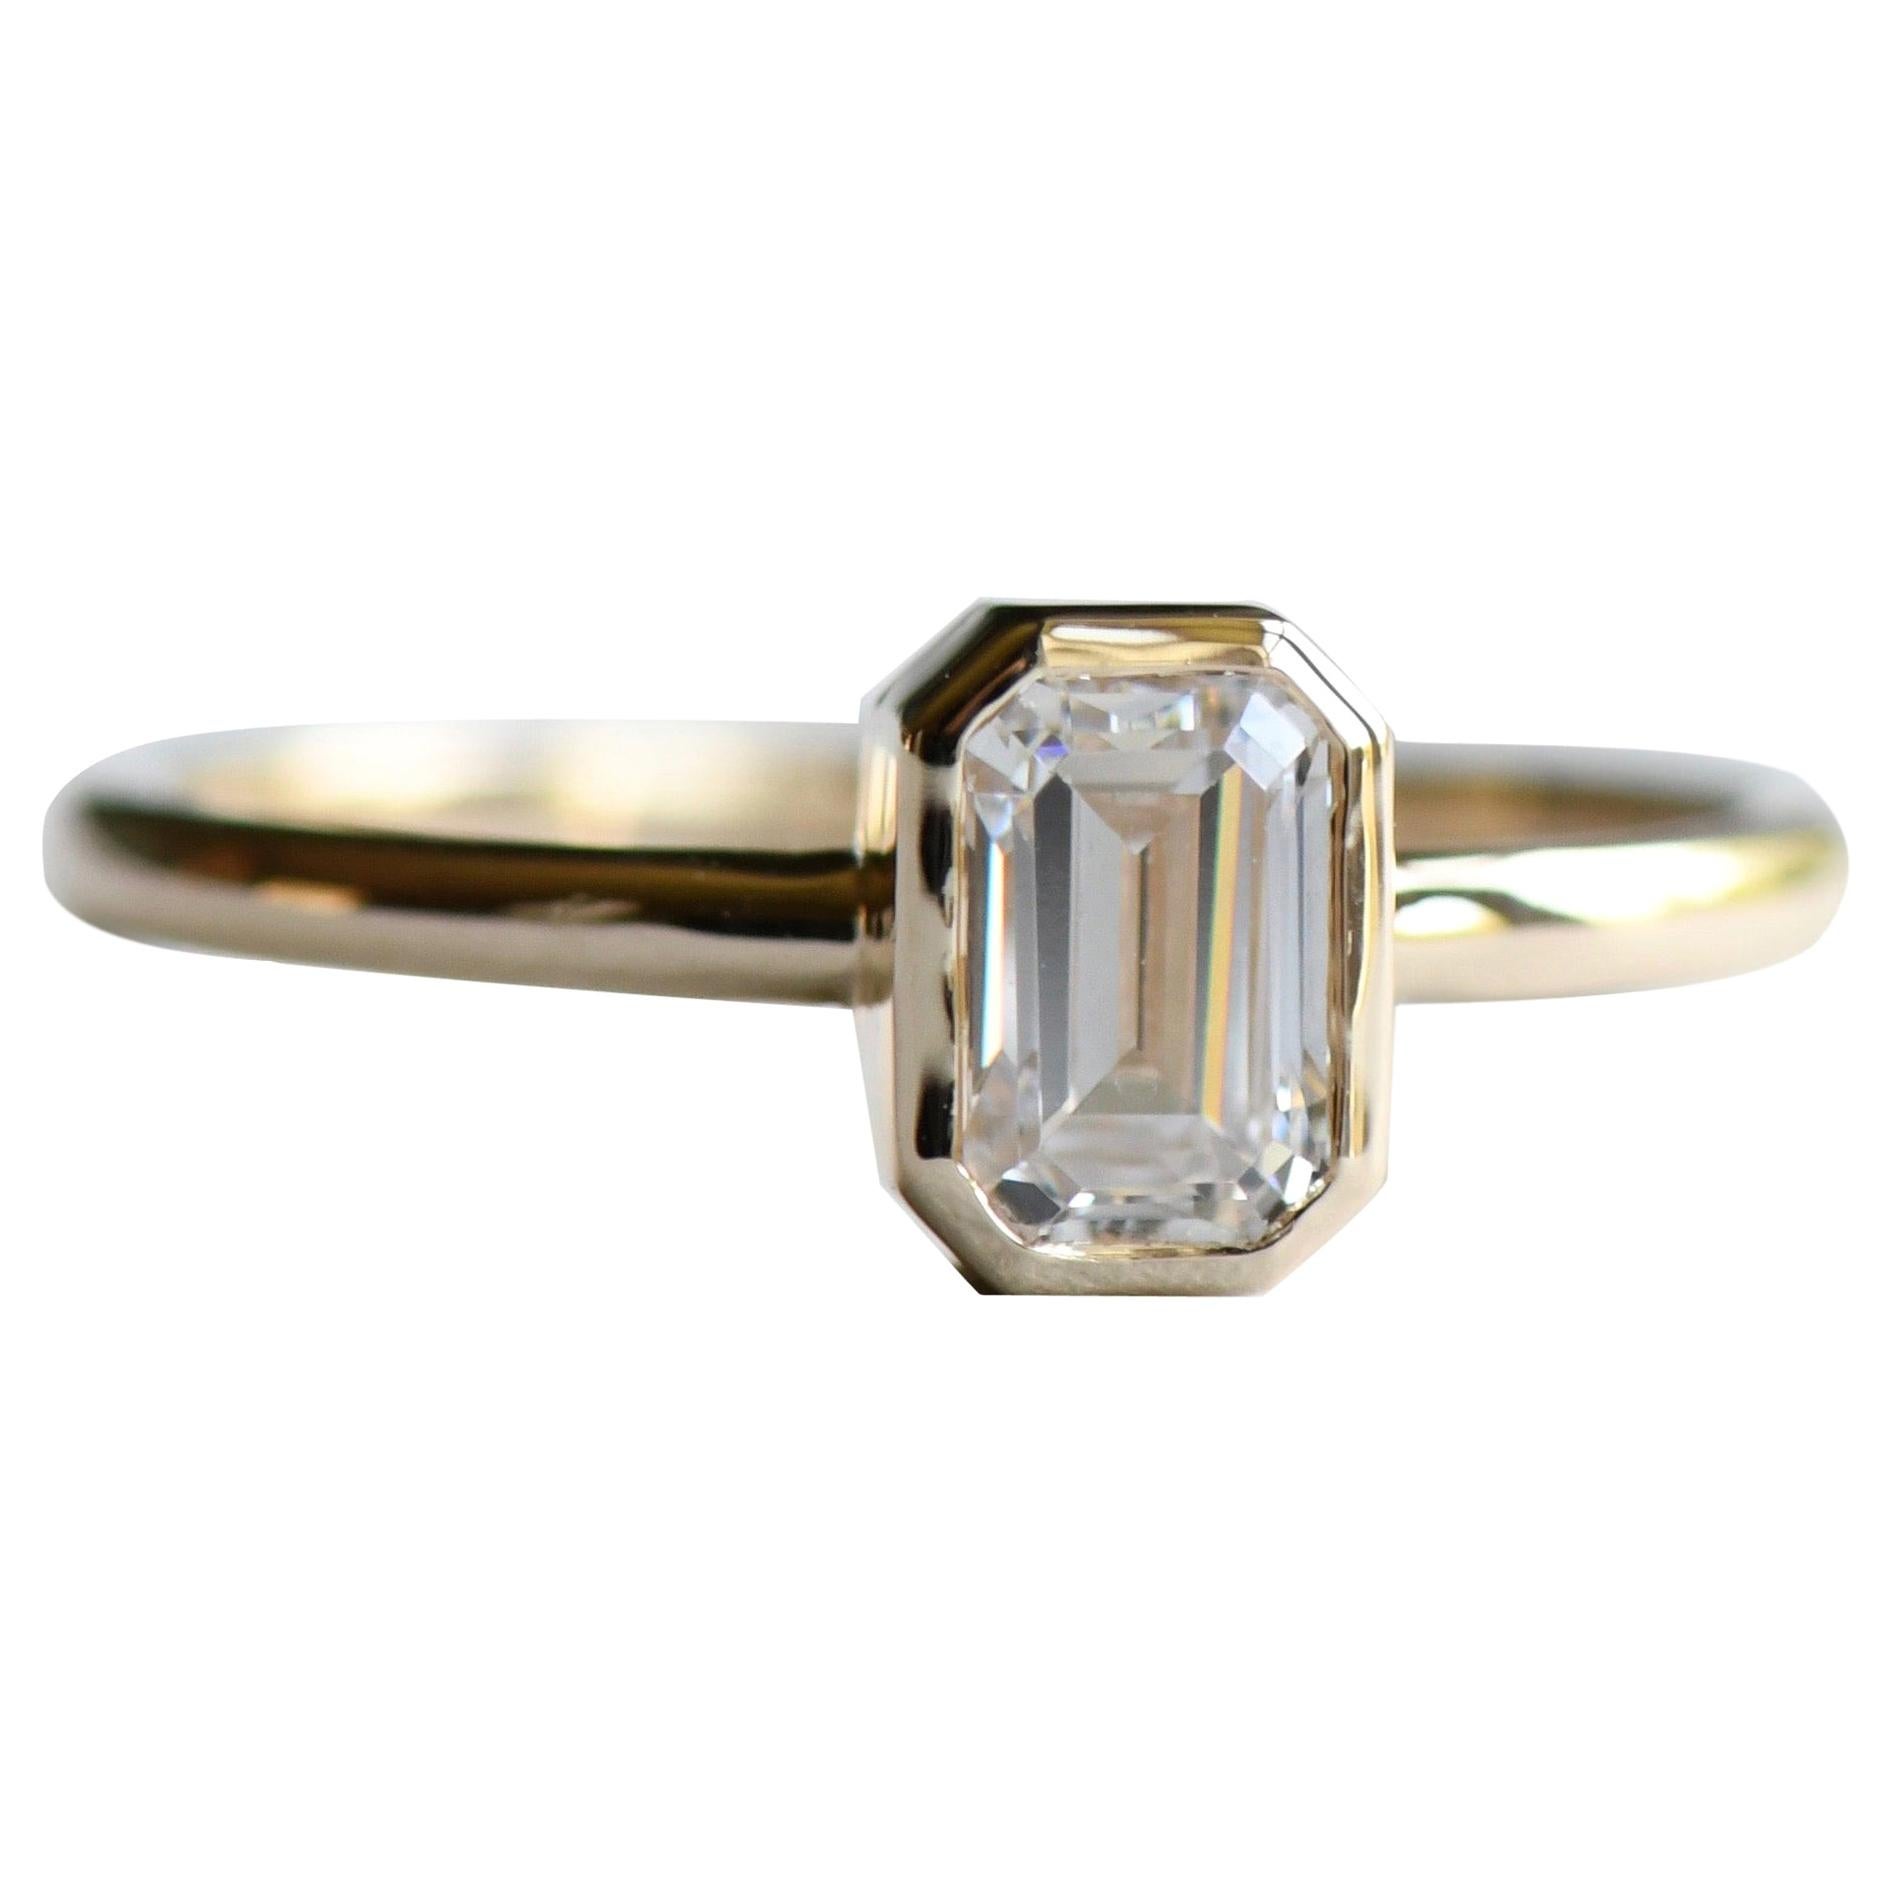 14 Karat Gold with 0.5 Carat Emerald Cut Diamond Solitaire Ring, Engagement Ring